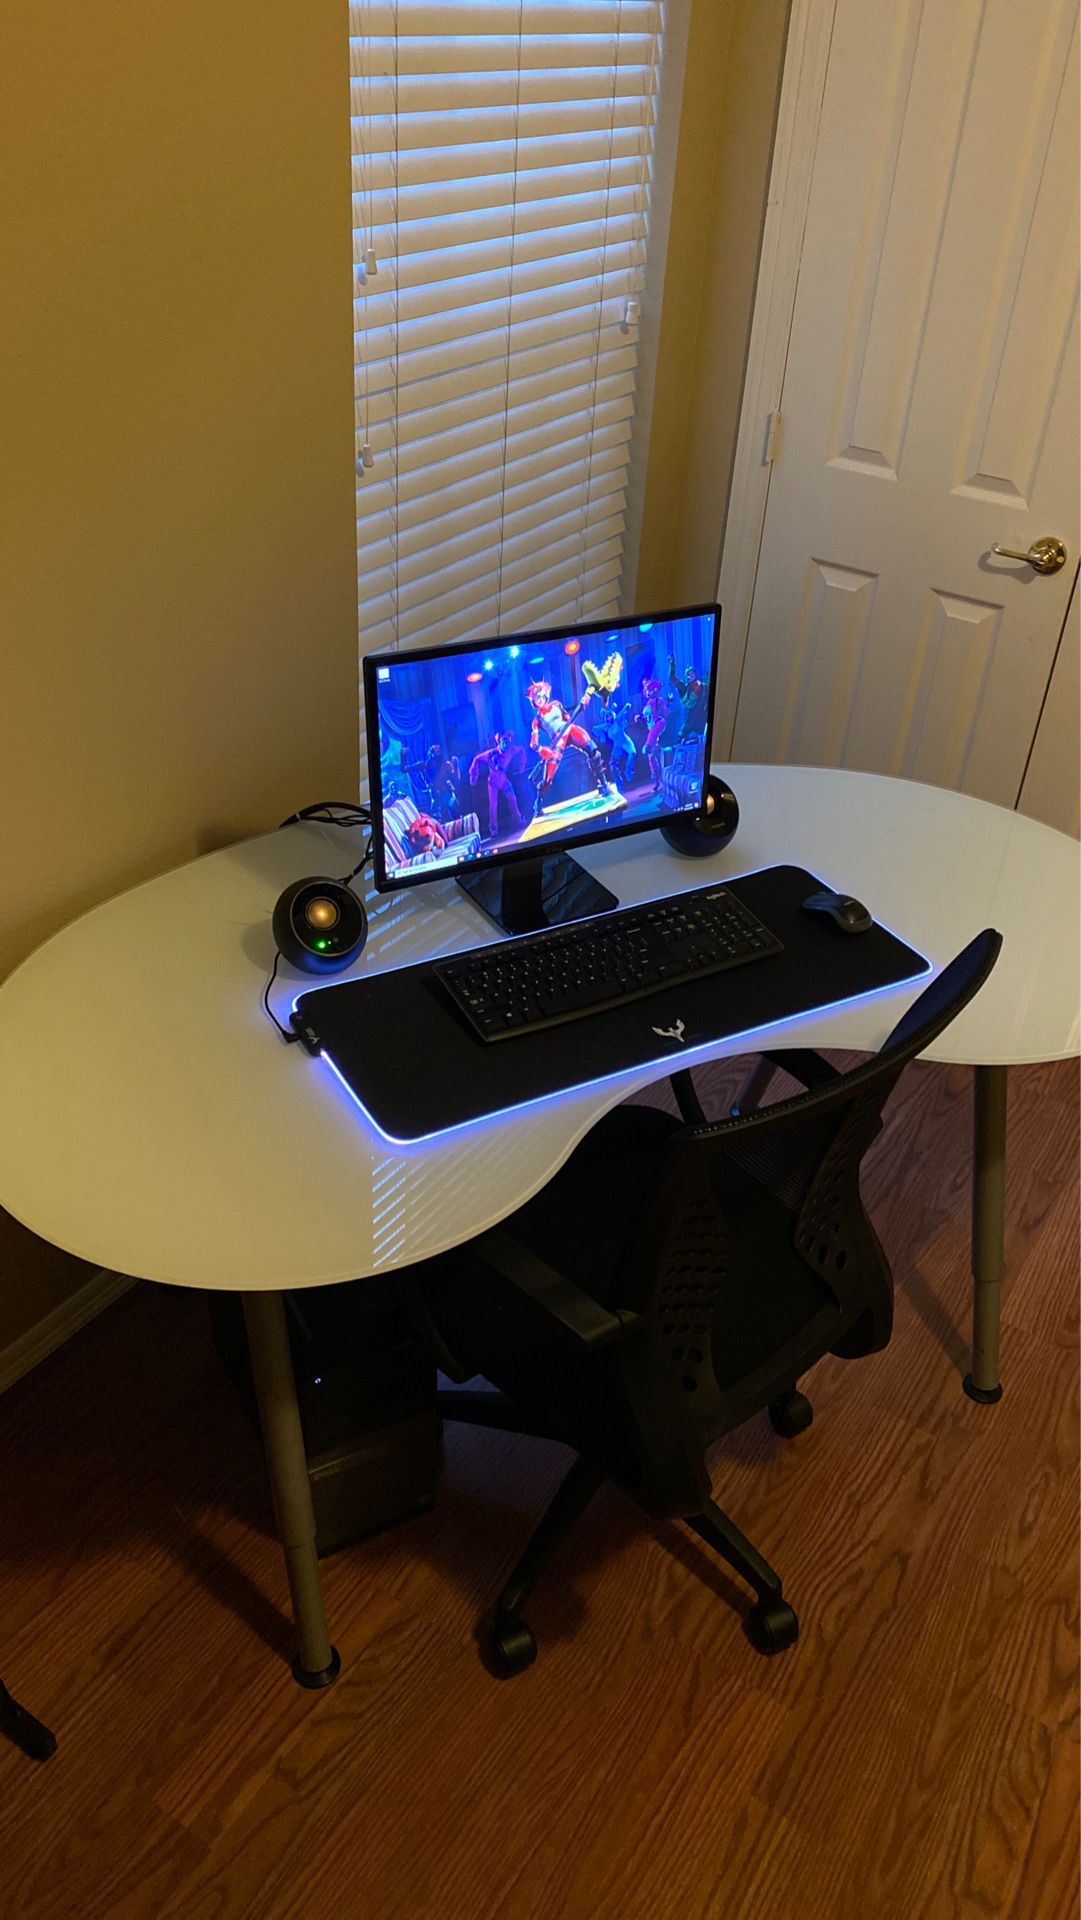 Dell computer, monitor, glass desk, chair, speakers, keyboard and mouse with LED light pad